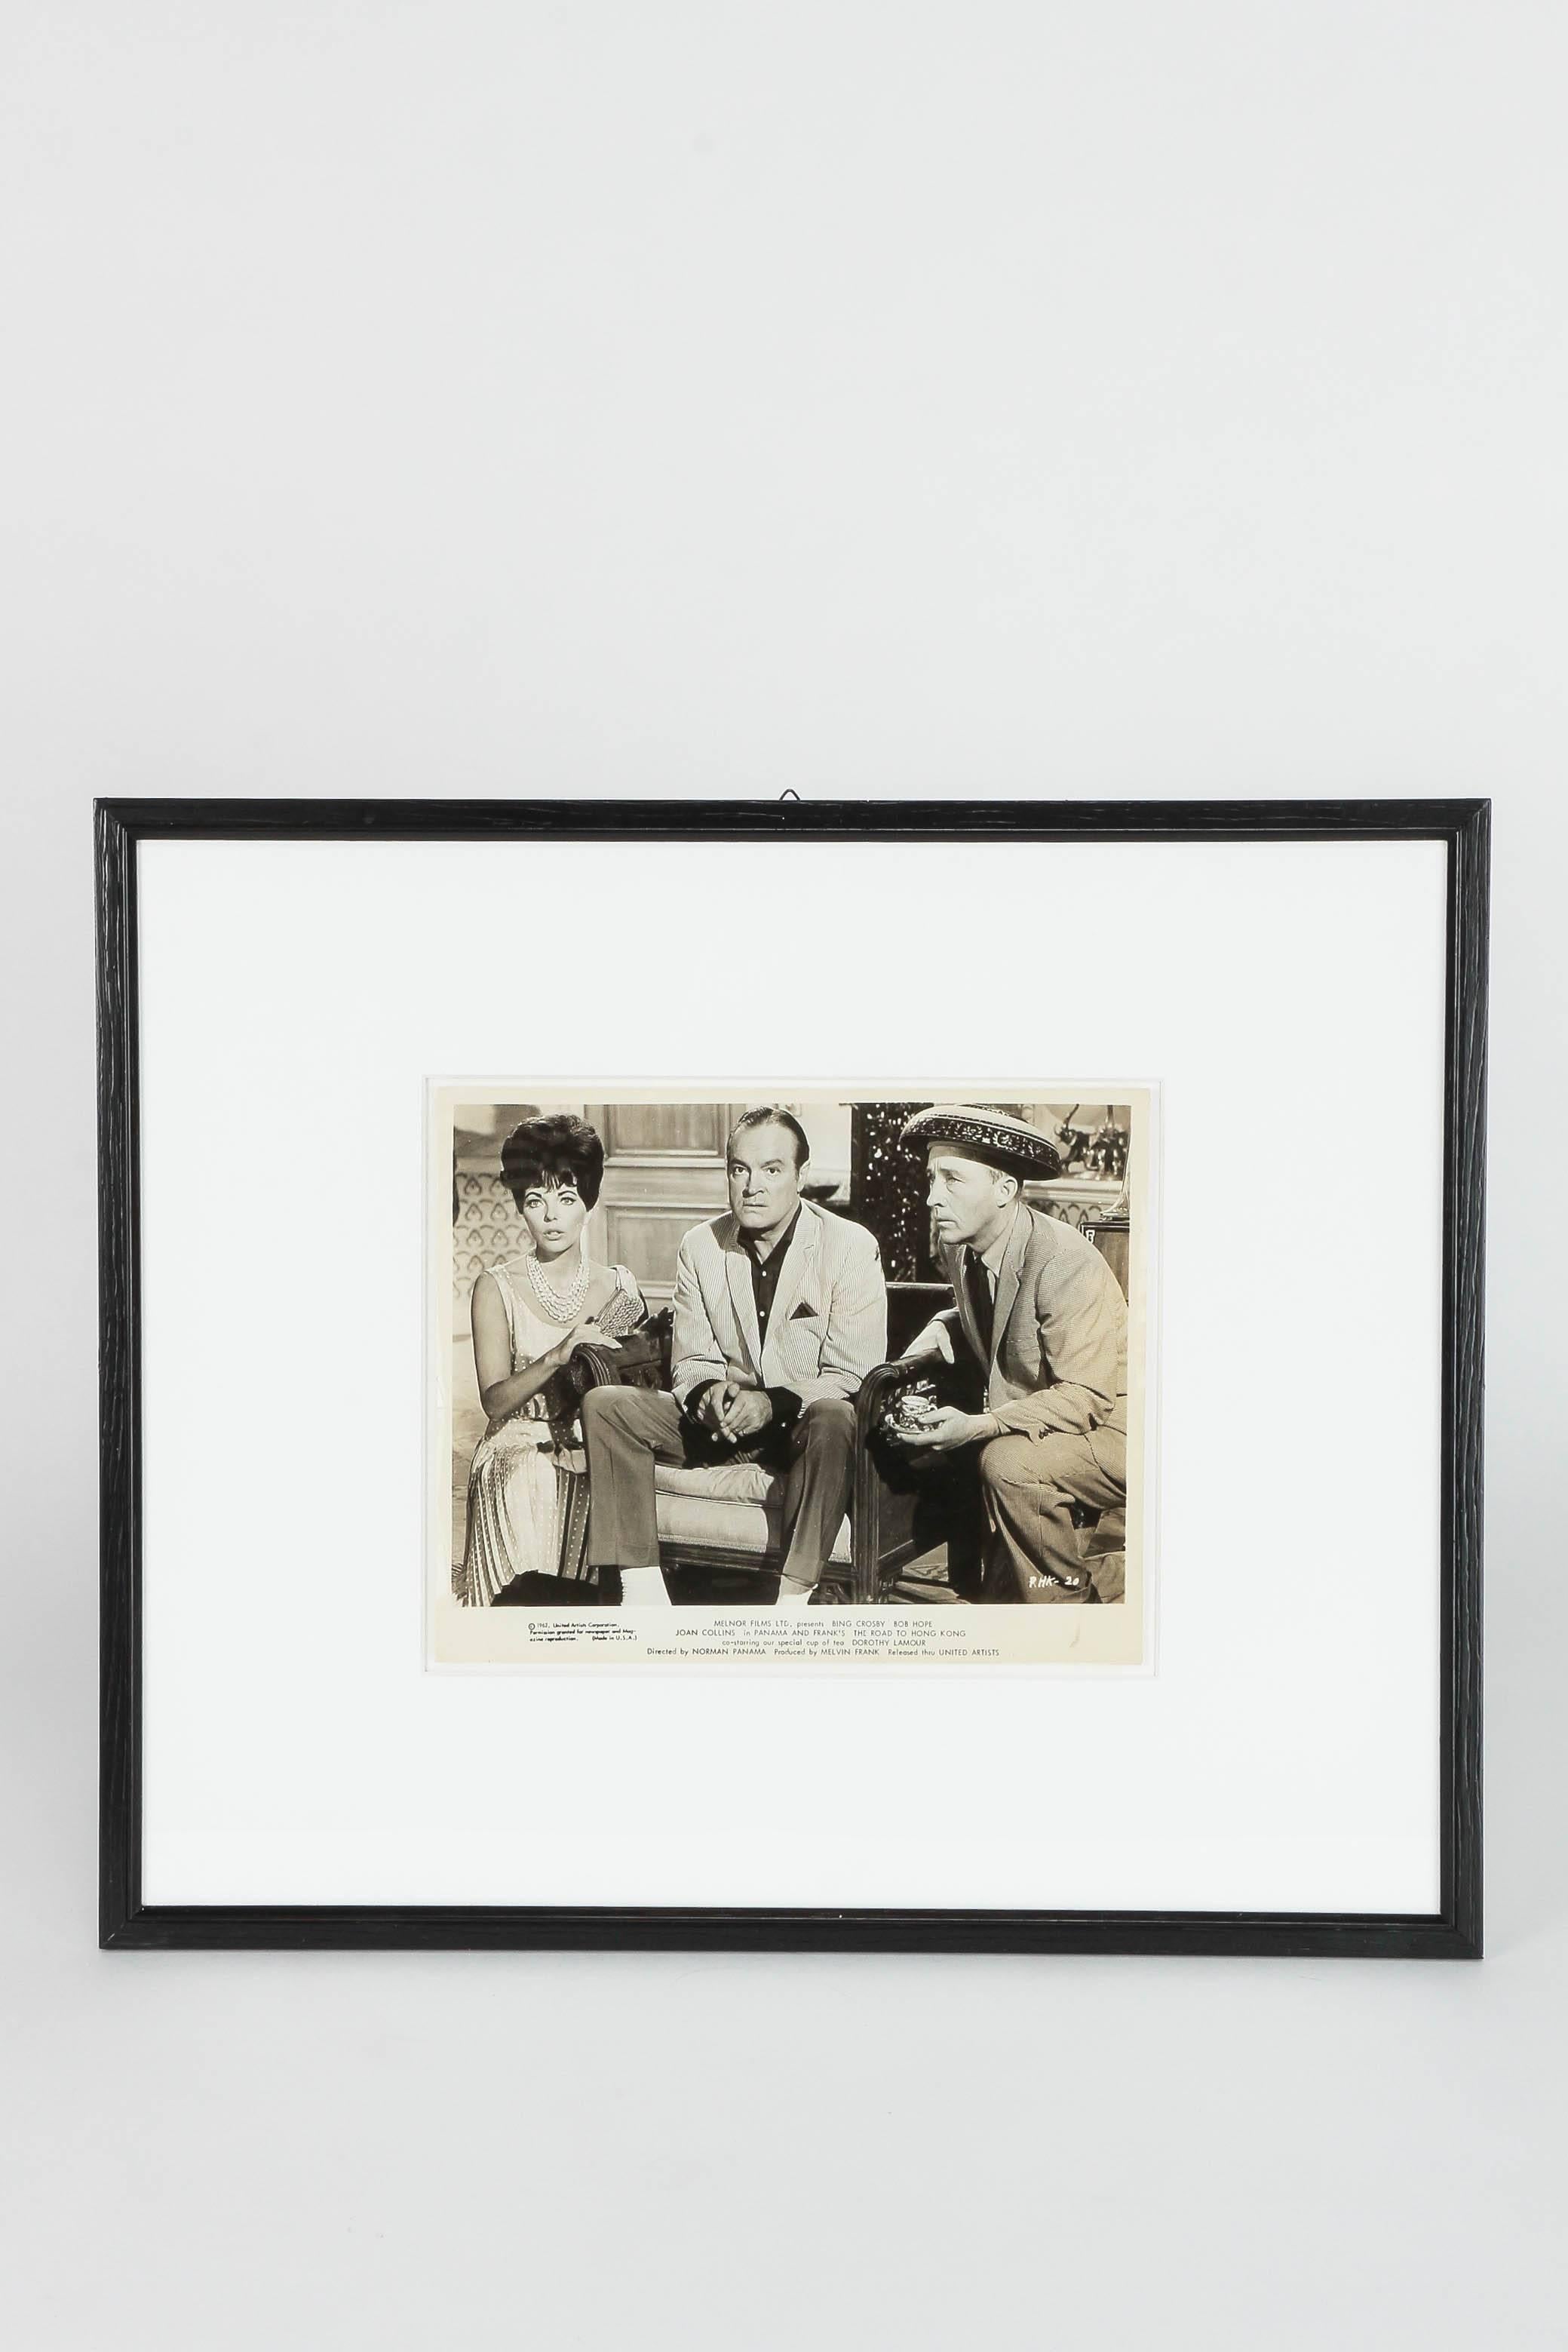 Original film photo by Paramount Pictures for the 1962 released movie The Road To Hong Kong. It shows the three main characters (f.l.t.r) Joan Collins as Diane, Bob Hope as Chester Babcock and Bing Crosby as Harry Turner. Frame is made of black